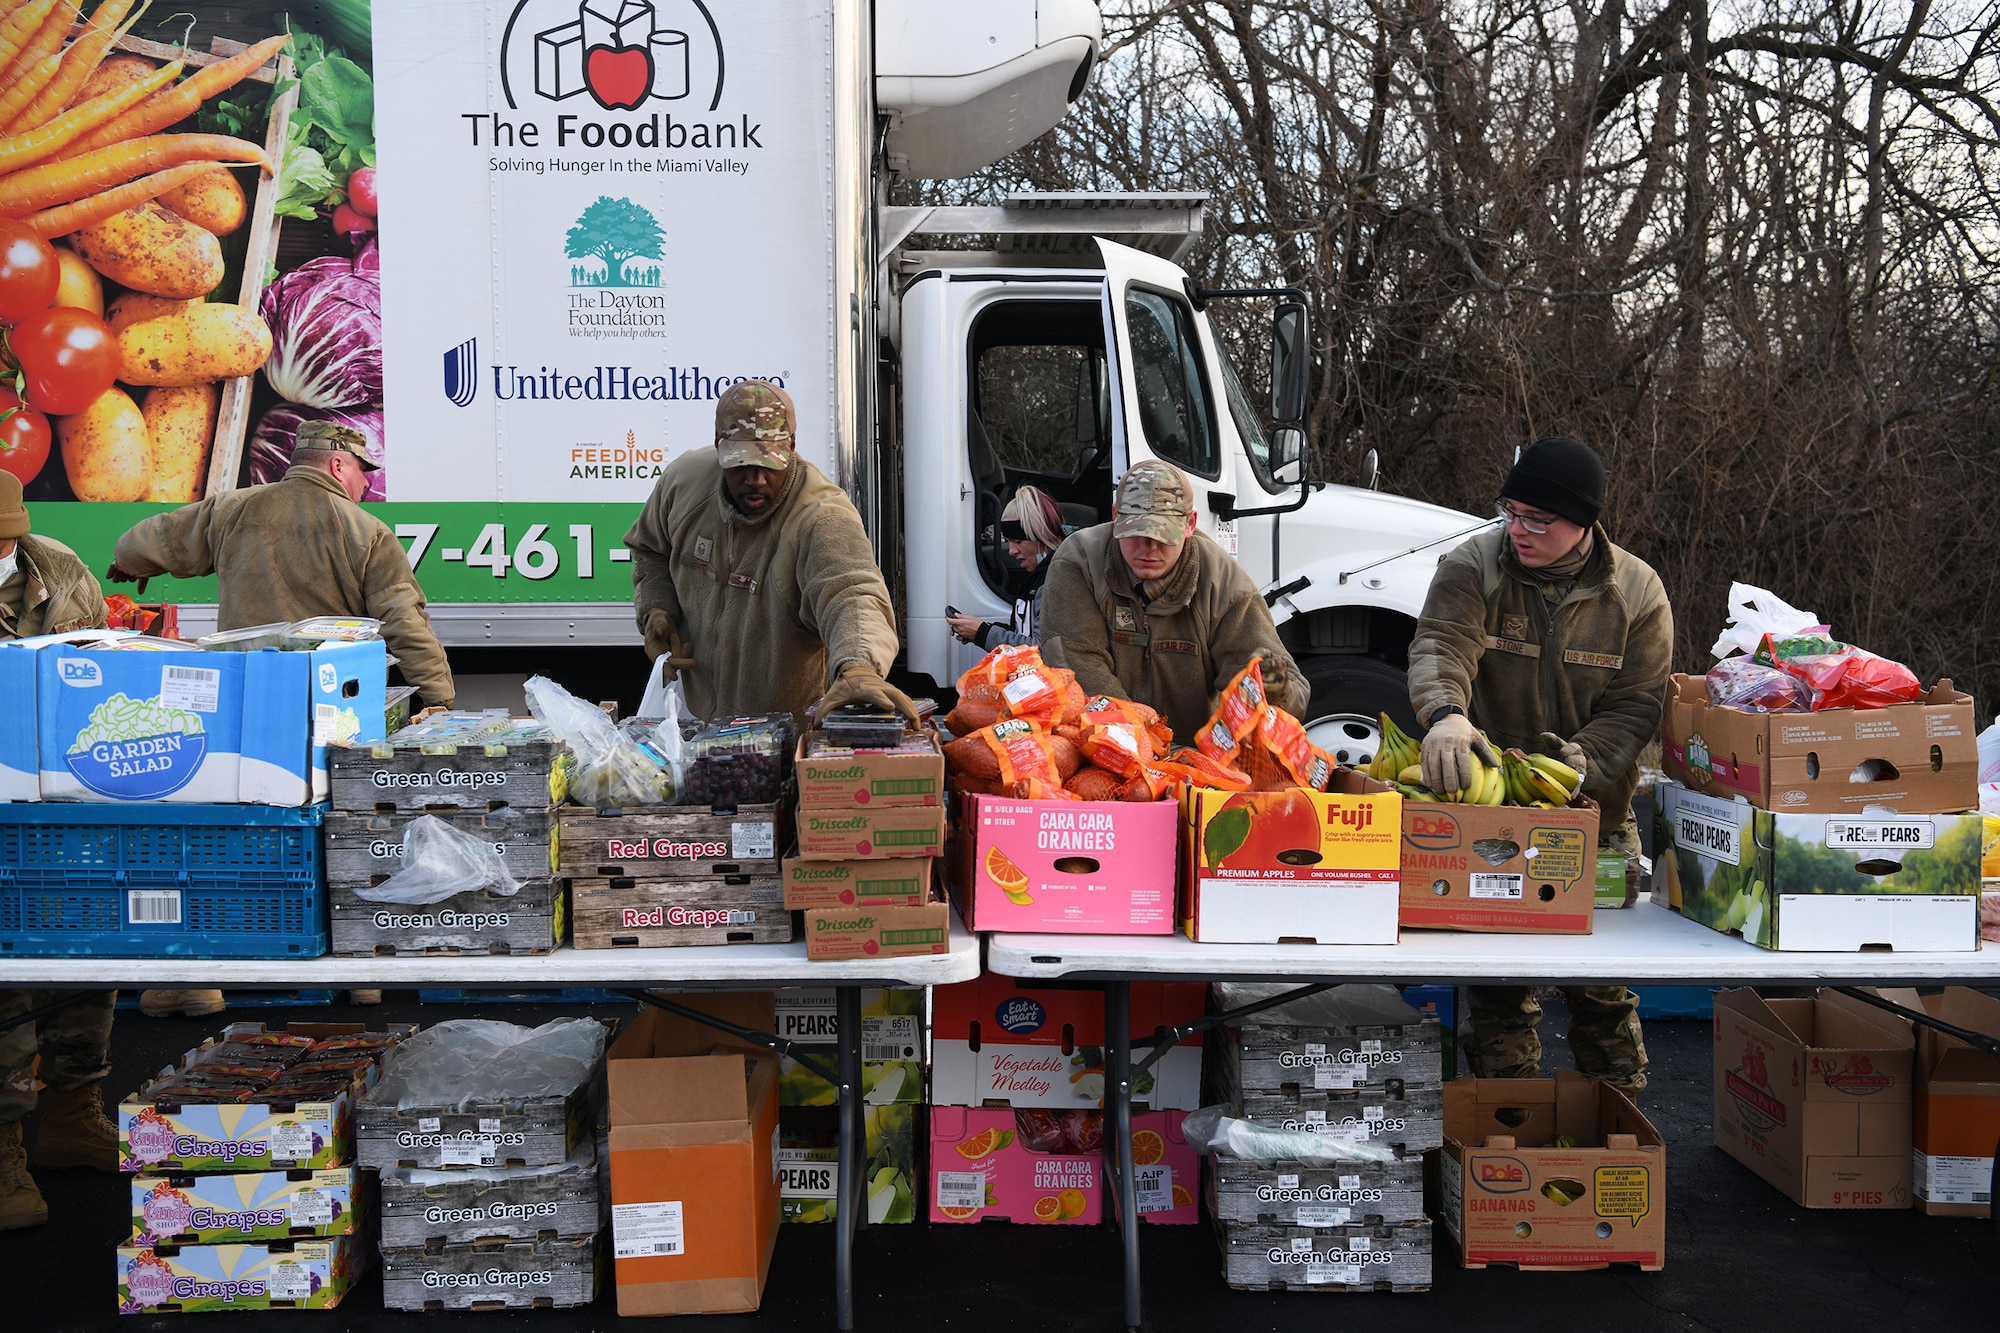 Fifteen Reserve Citizen Airmen from the 445th Airlift Wing and 655th Intelligence, Surveillance and Reconnaissance Wing, Wright-Patterson Air Force Base, Ohio, volunteered at a mobile food bank delivery held at Phillips Temple Church, Trotwood, Ohio Jan. 19, 2022. Volunteers collected, sorted, organized and prepped food that included fresh fruit, vegetables, chicken and baked goods that was given to families in need within the Trotwood area. The Airmen helped serve 86 families for a total of 145 individuals.